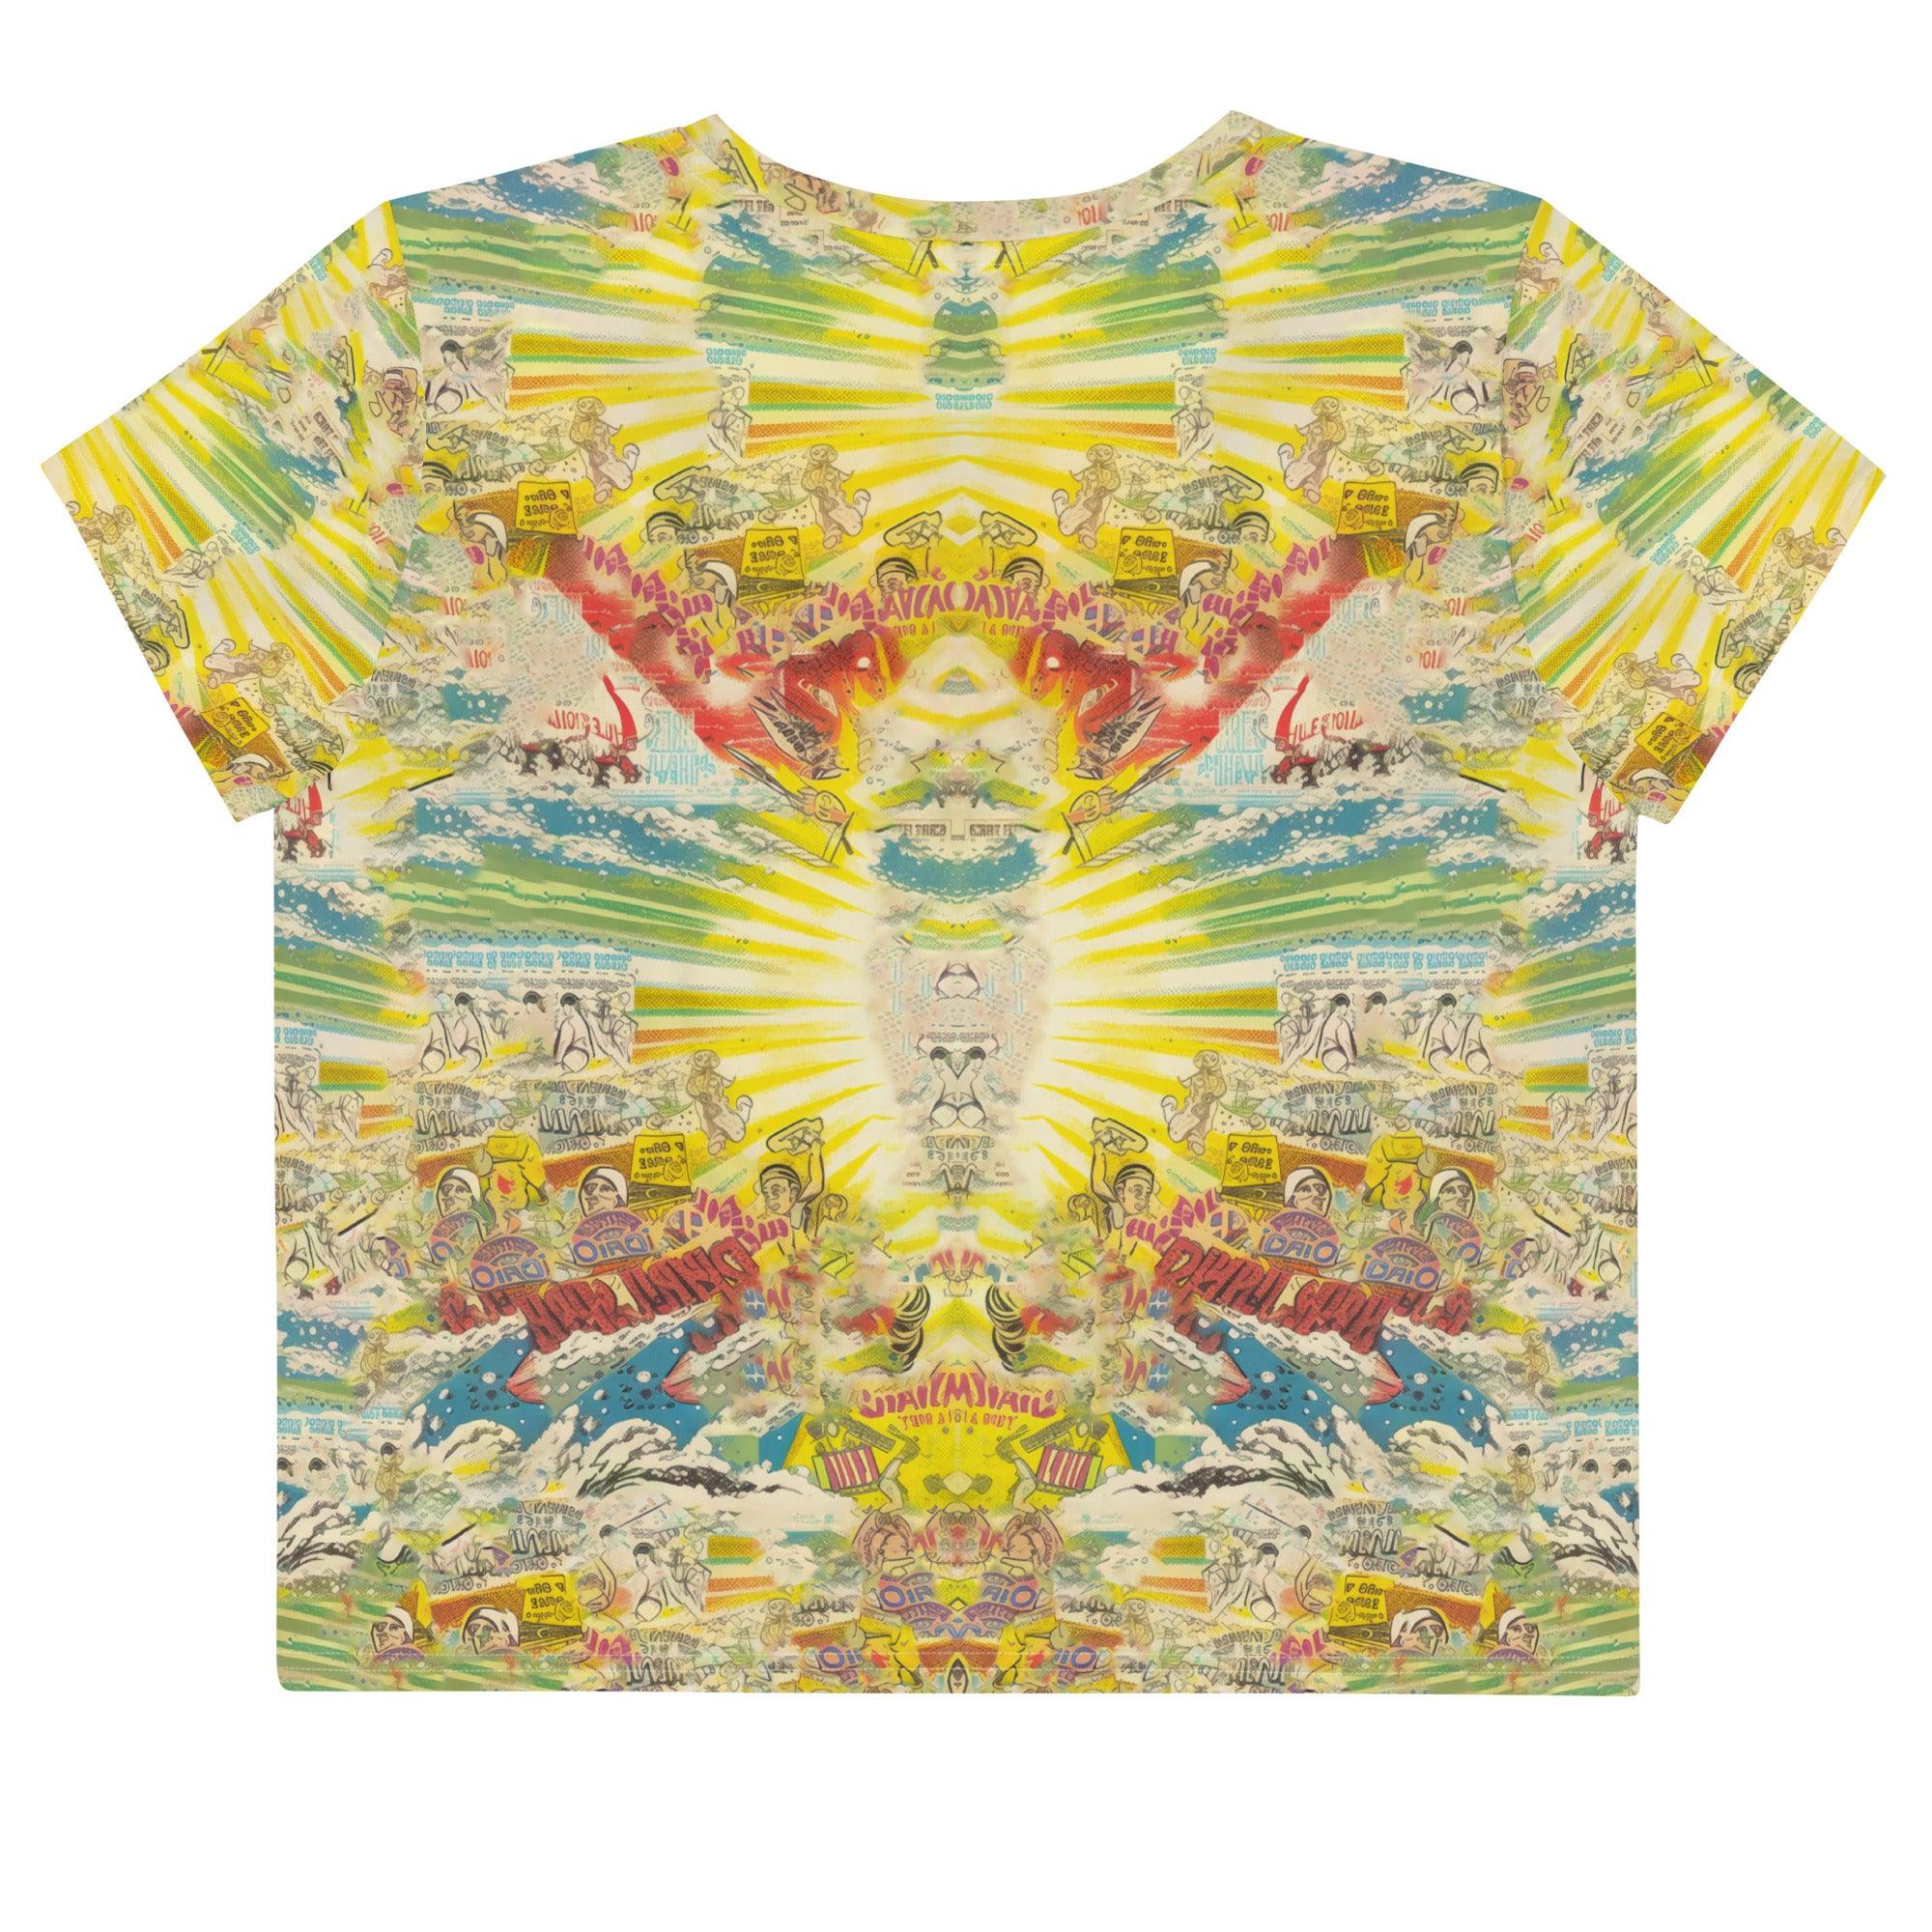 Surfing 1 25 All-Over Print Crop Tee - Beyond T-shirts